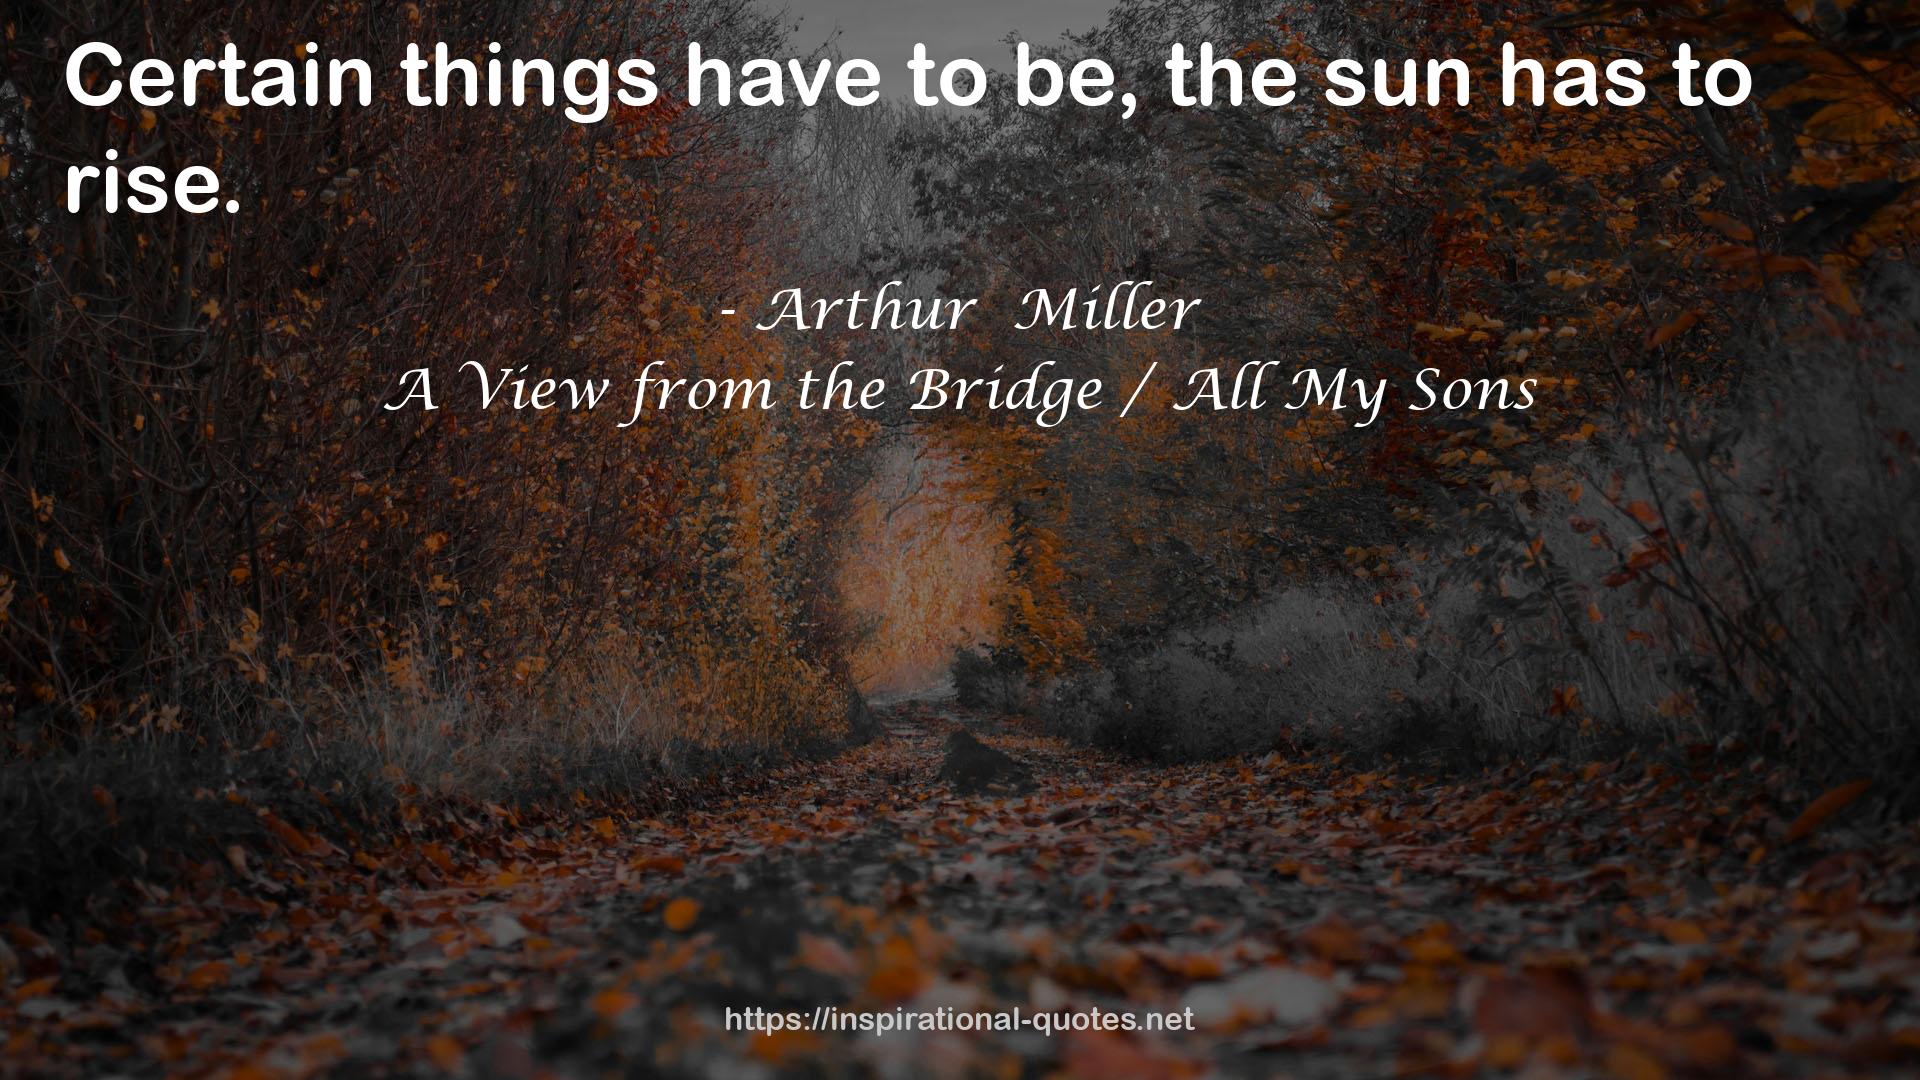 A View from the Bridge / All My Sons QUOTES